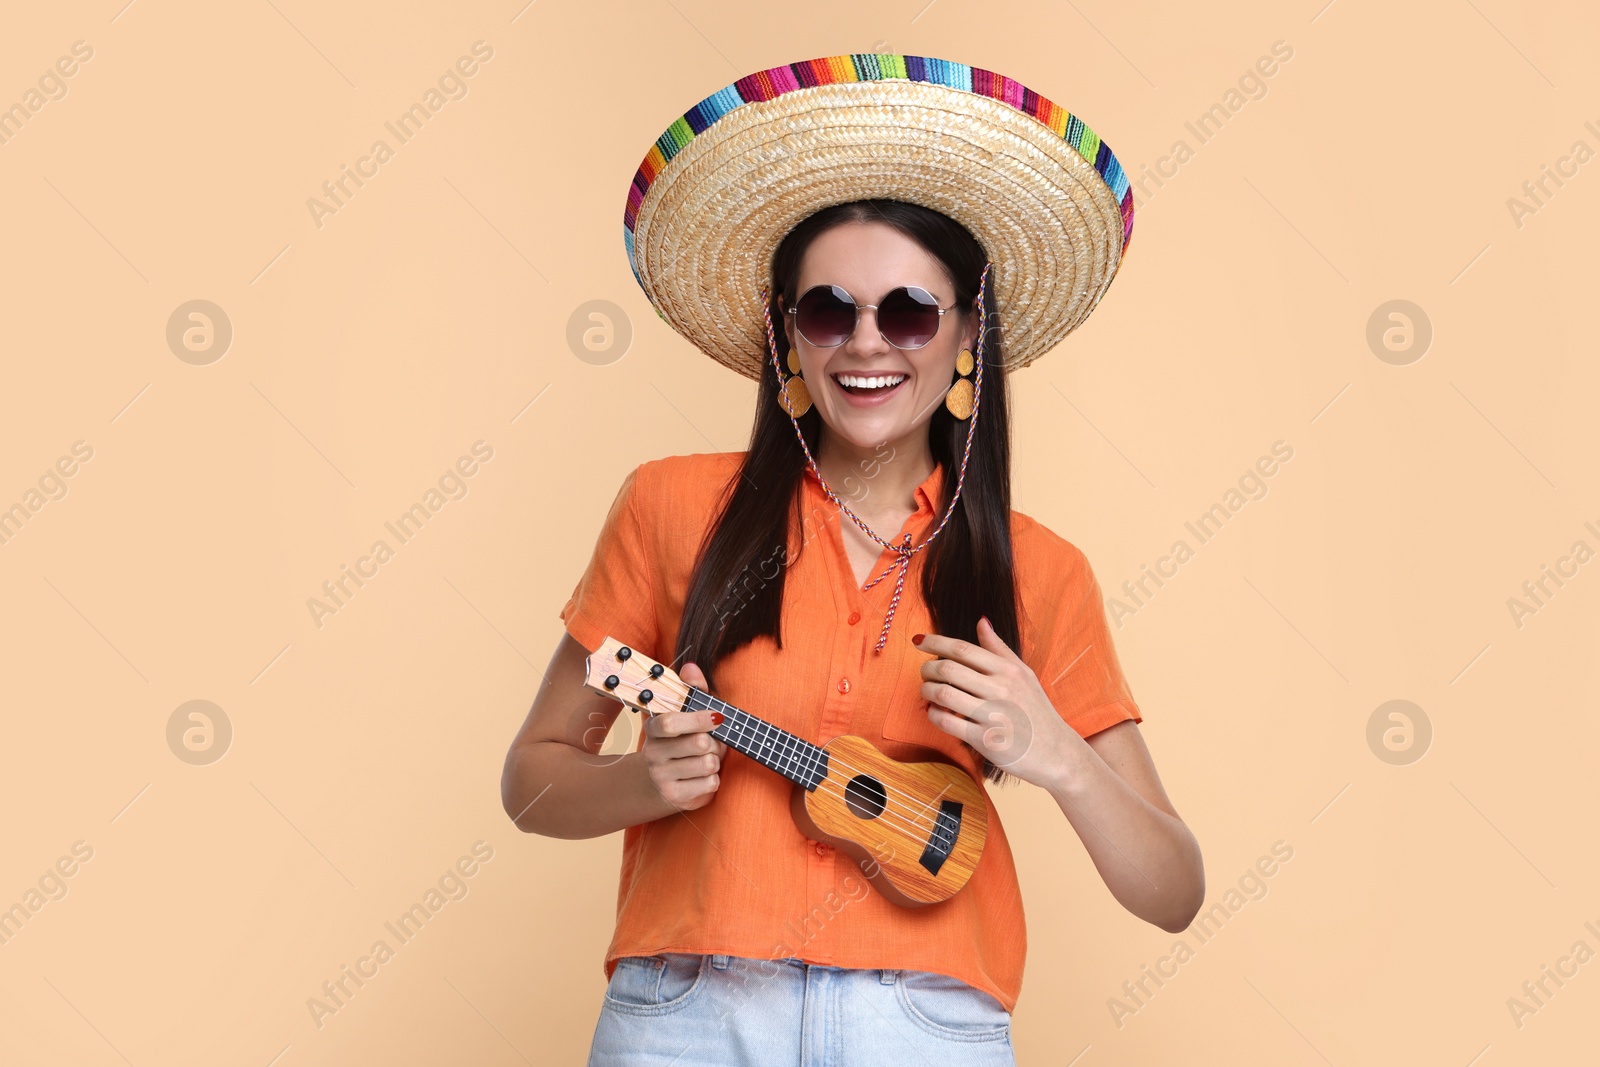 Photo of Young woman in Mexican sombrero hat playing ukulele on beige background